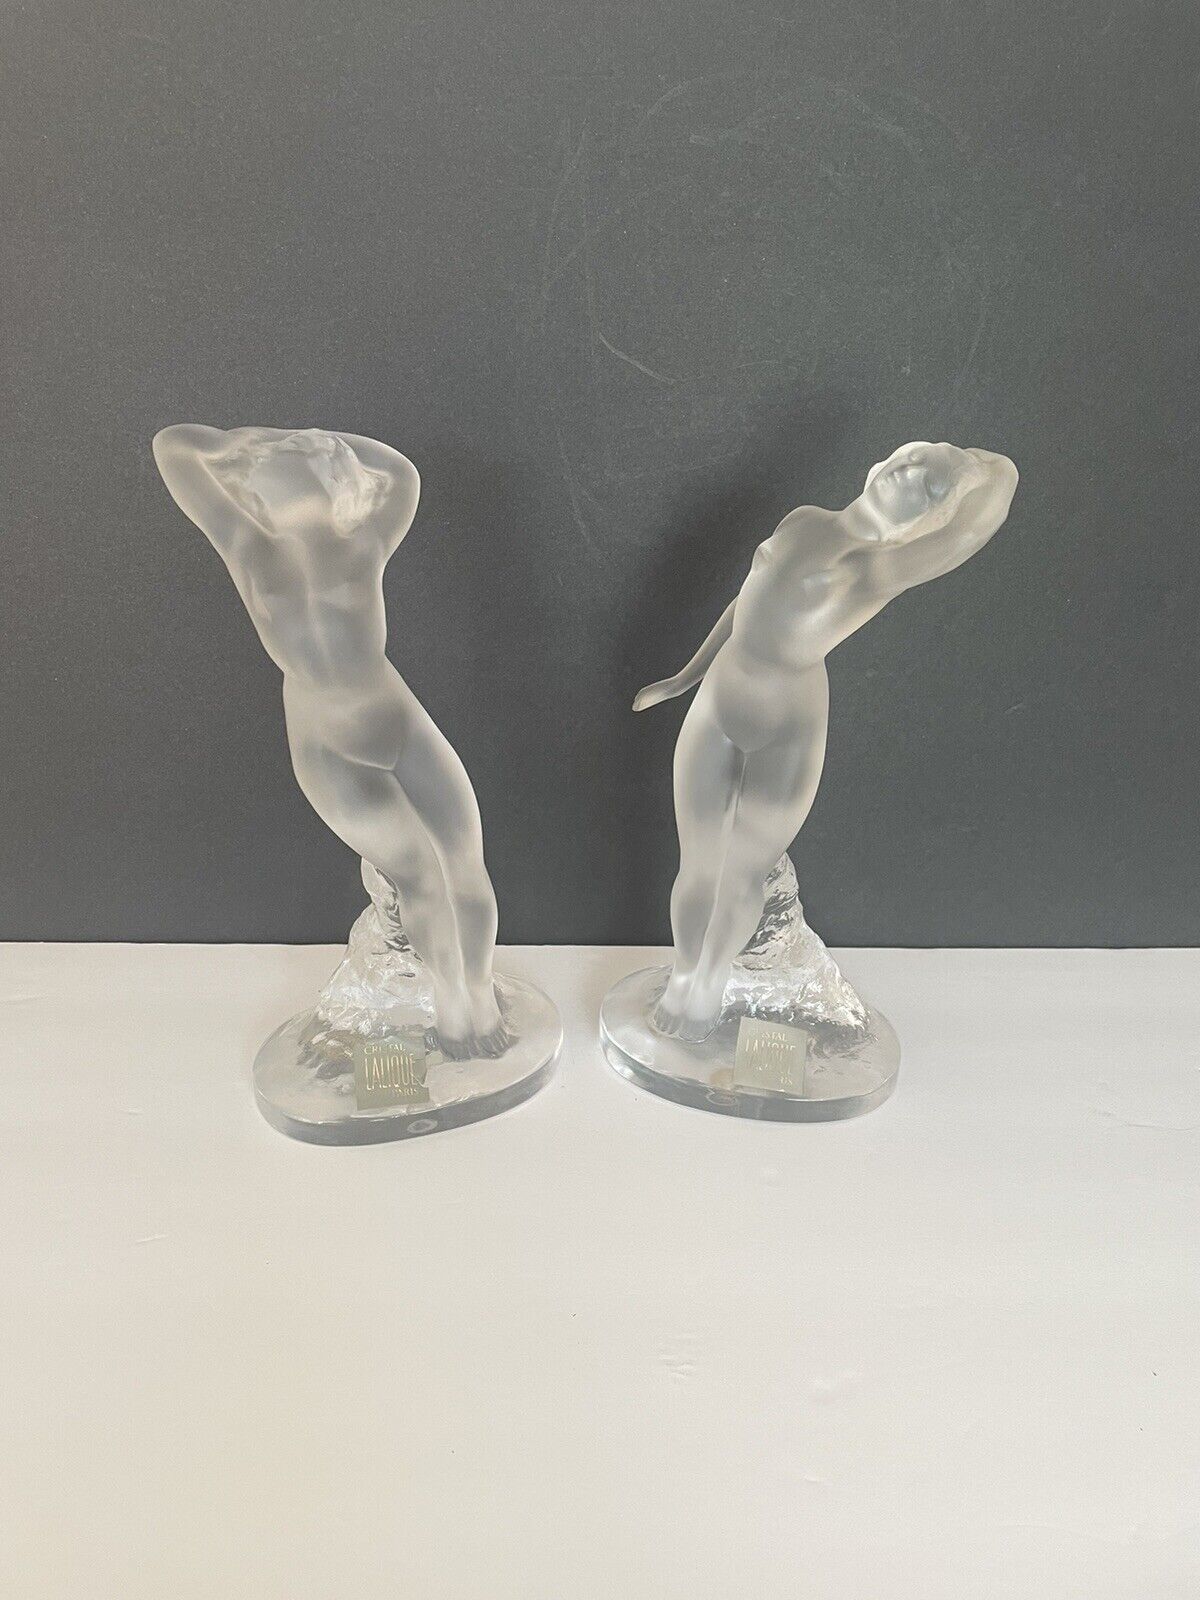 Signed Lalique Crystal, DANSEUSE Frosted Nude Female Dancer Pair Figurines